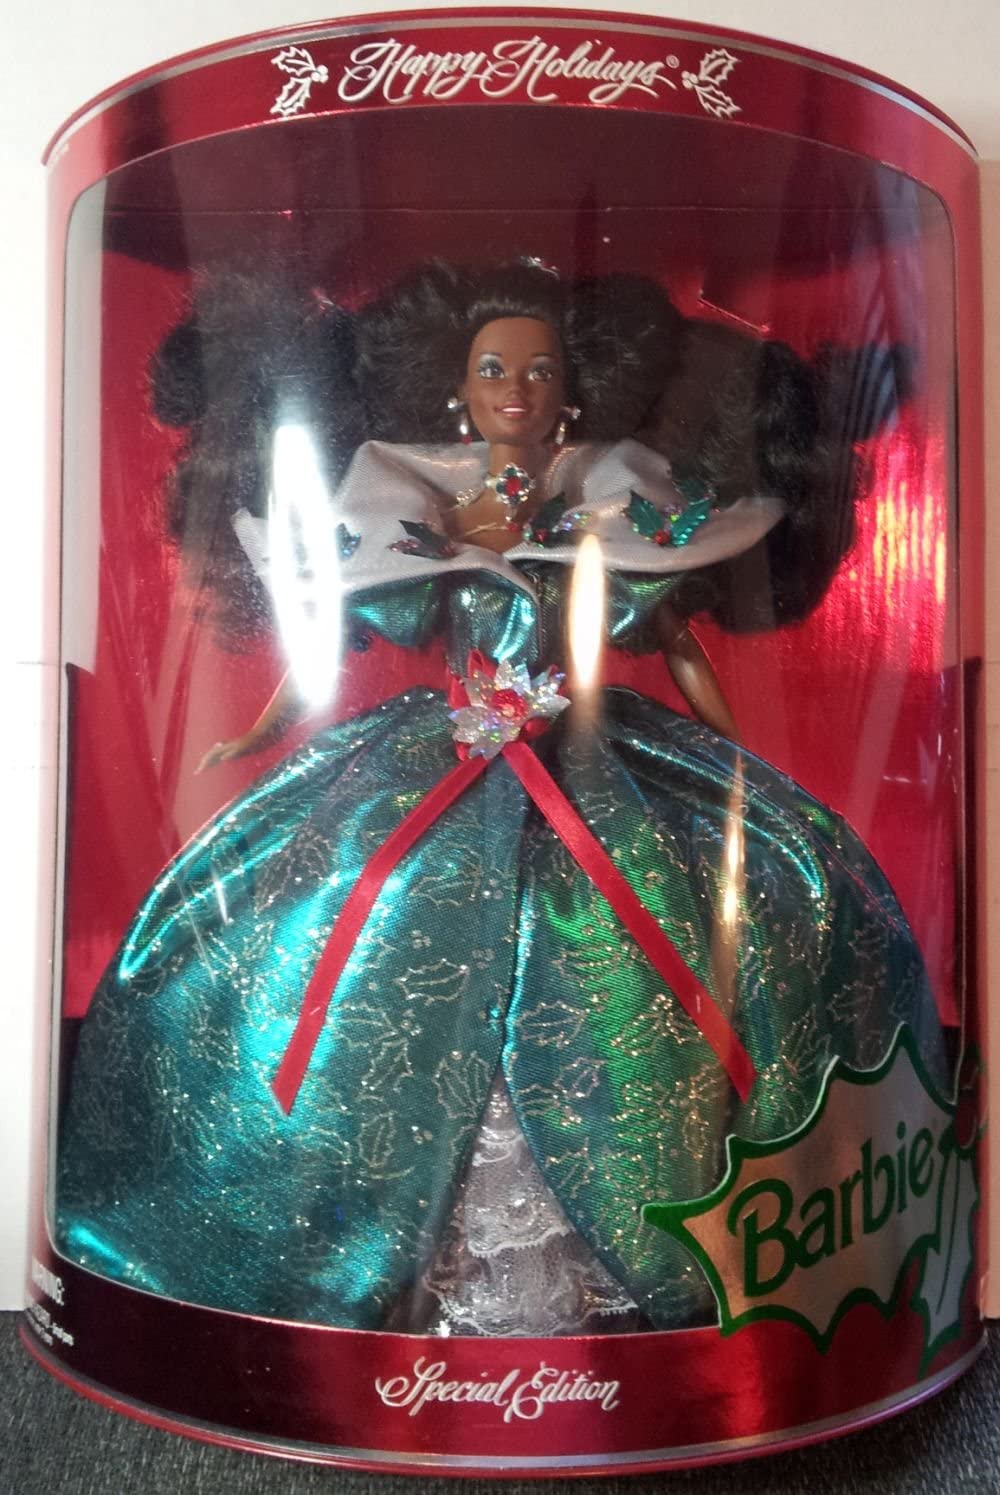 Happy Holiday 1995 Barbie Doll for sale online